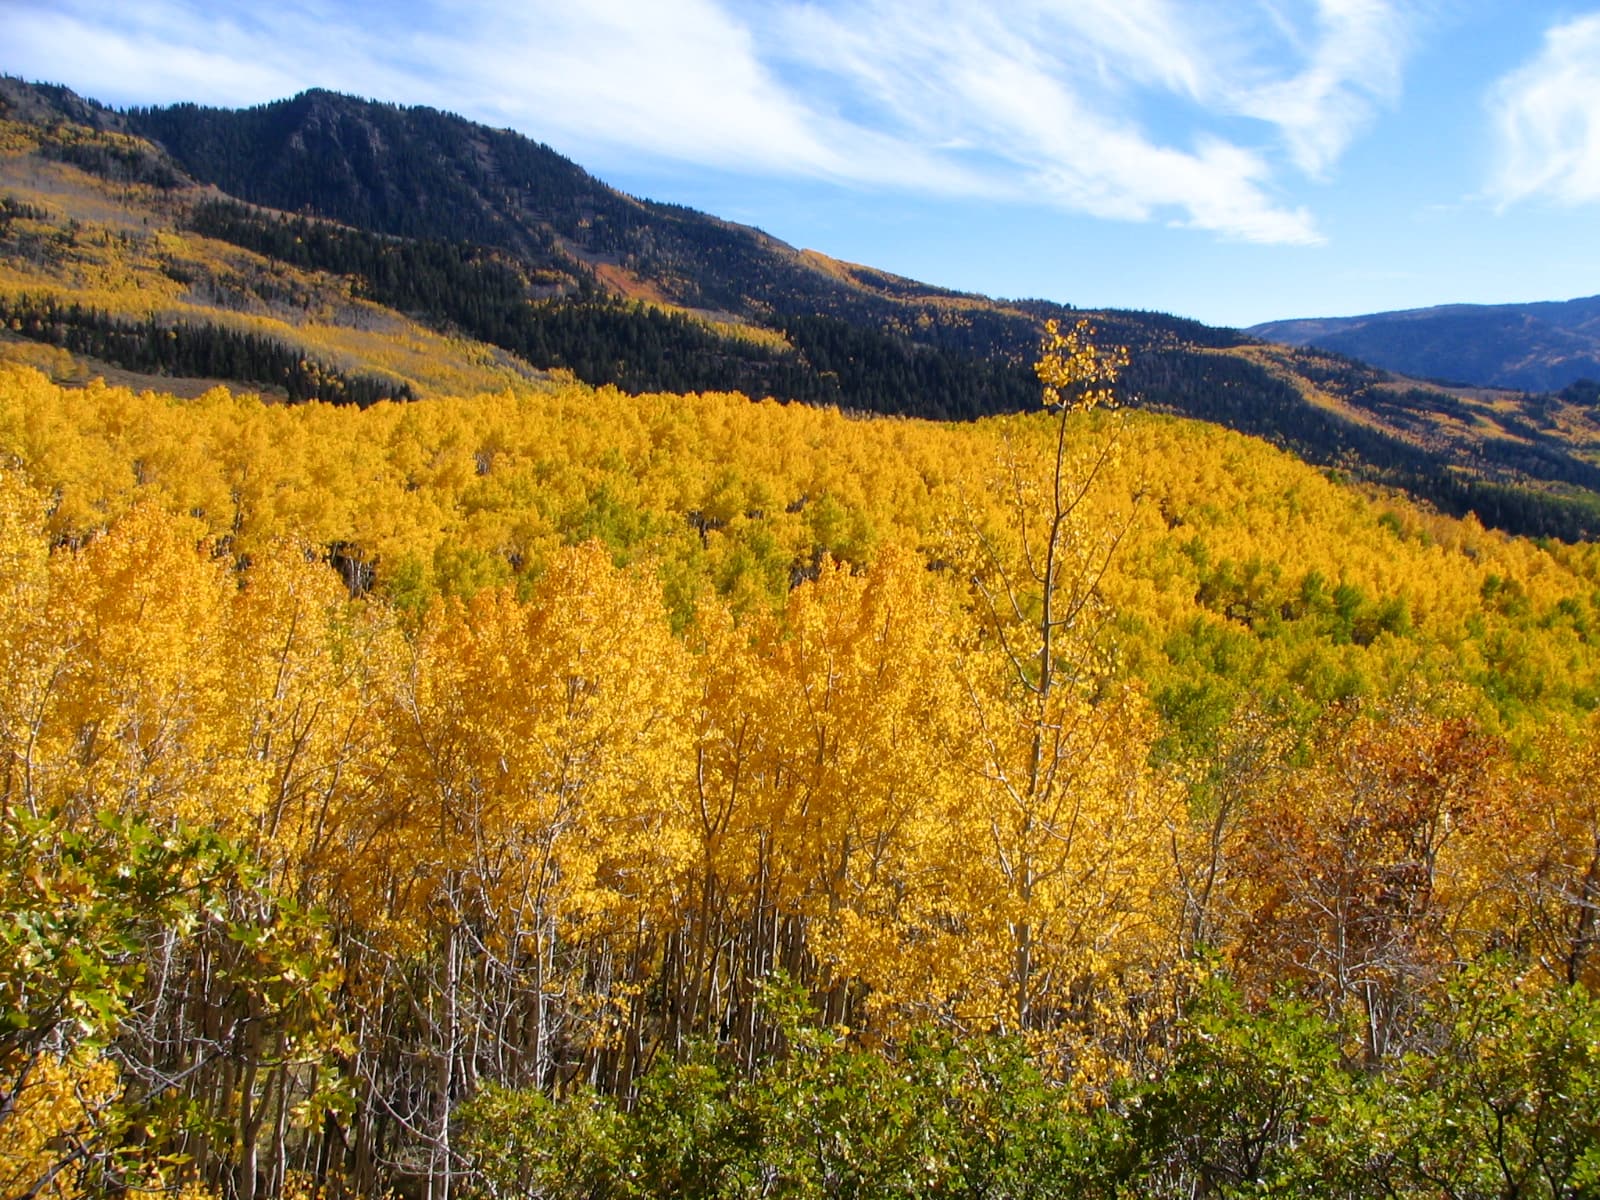 Pando Grove in fall with mountains in the background.